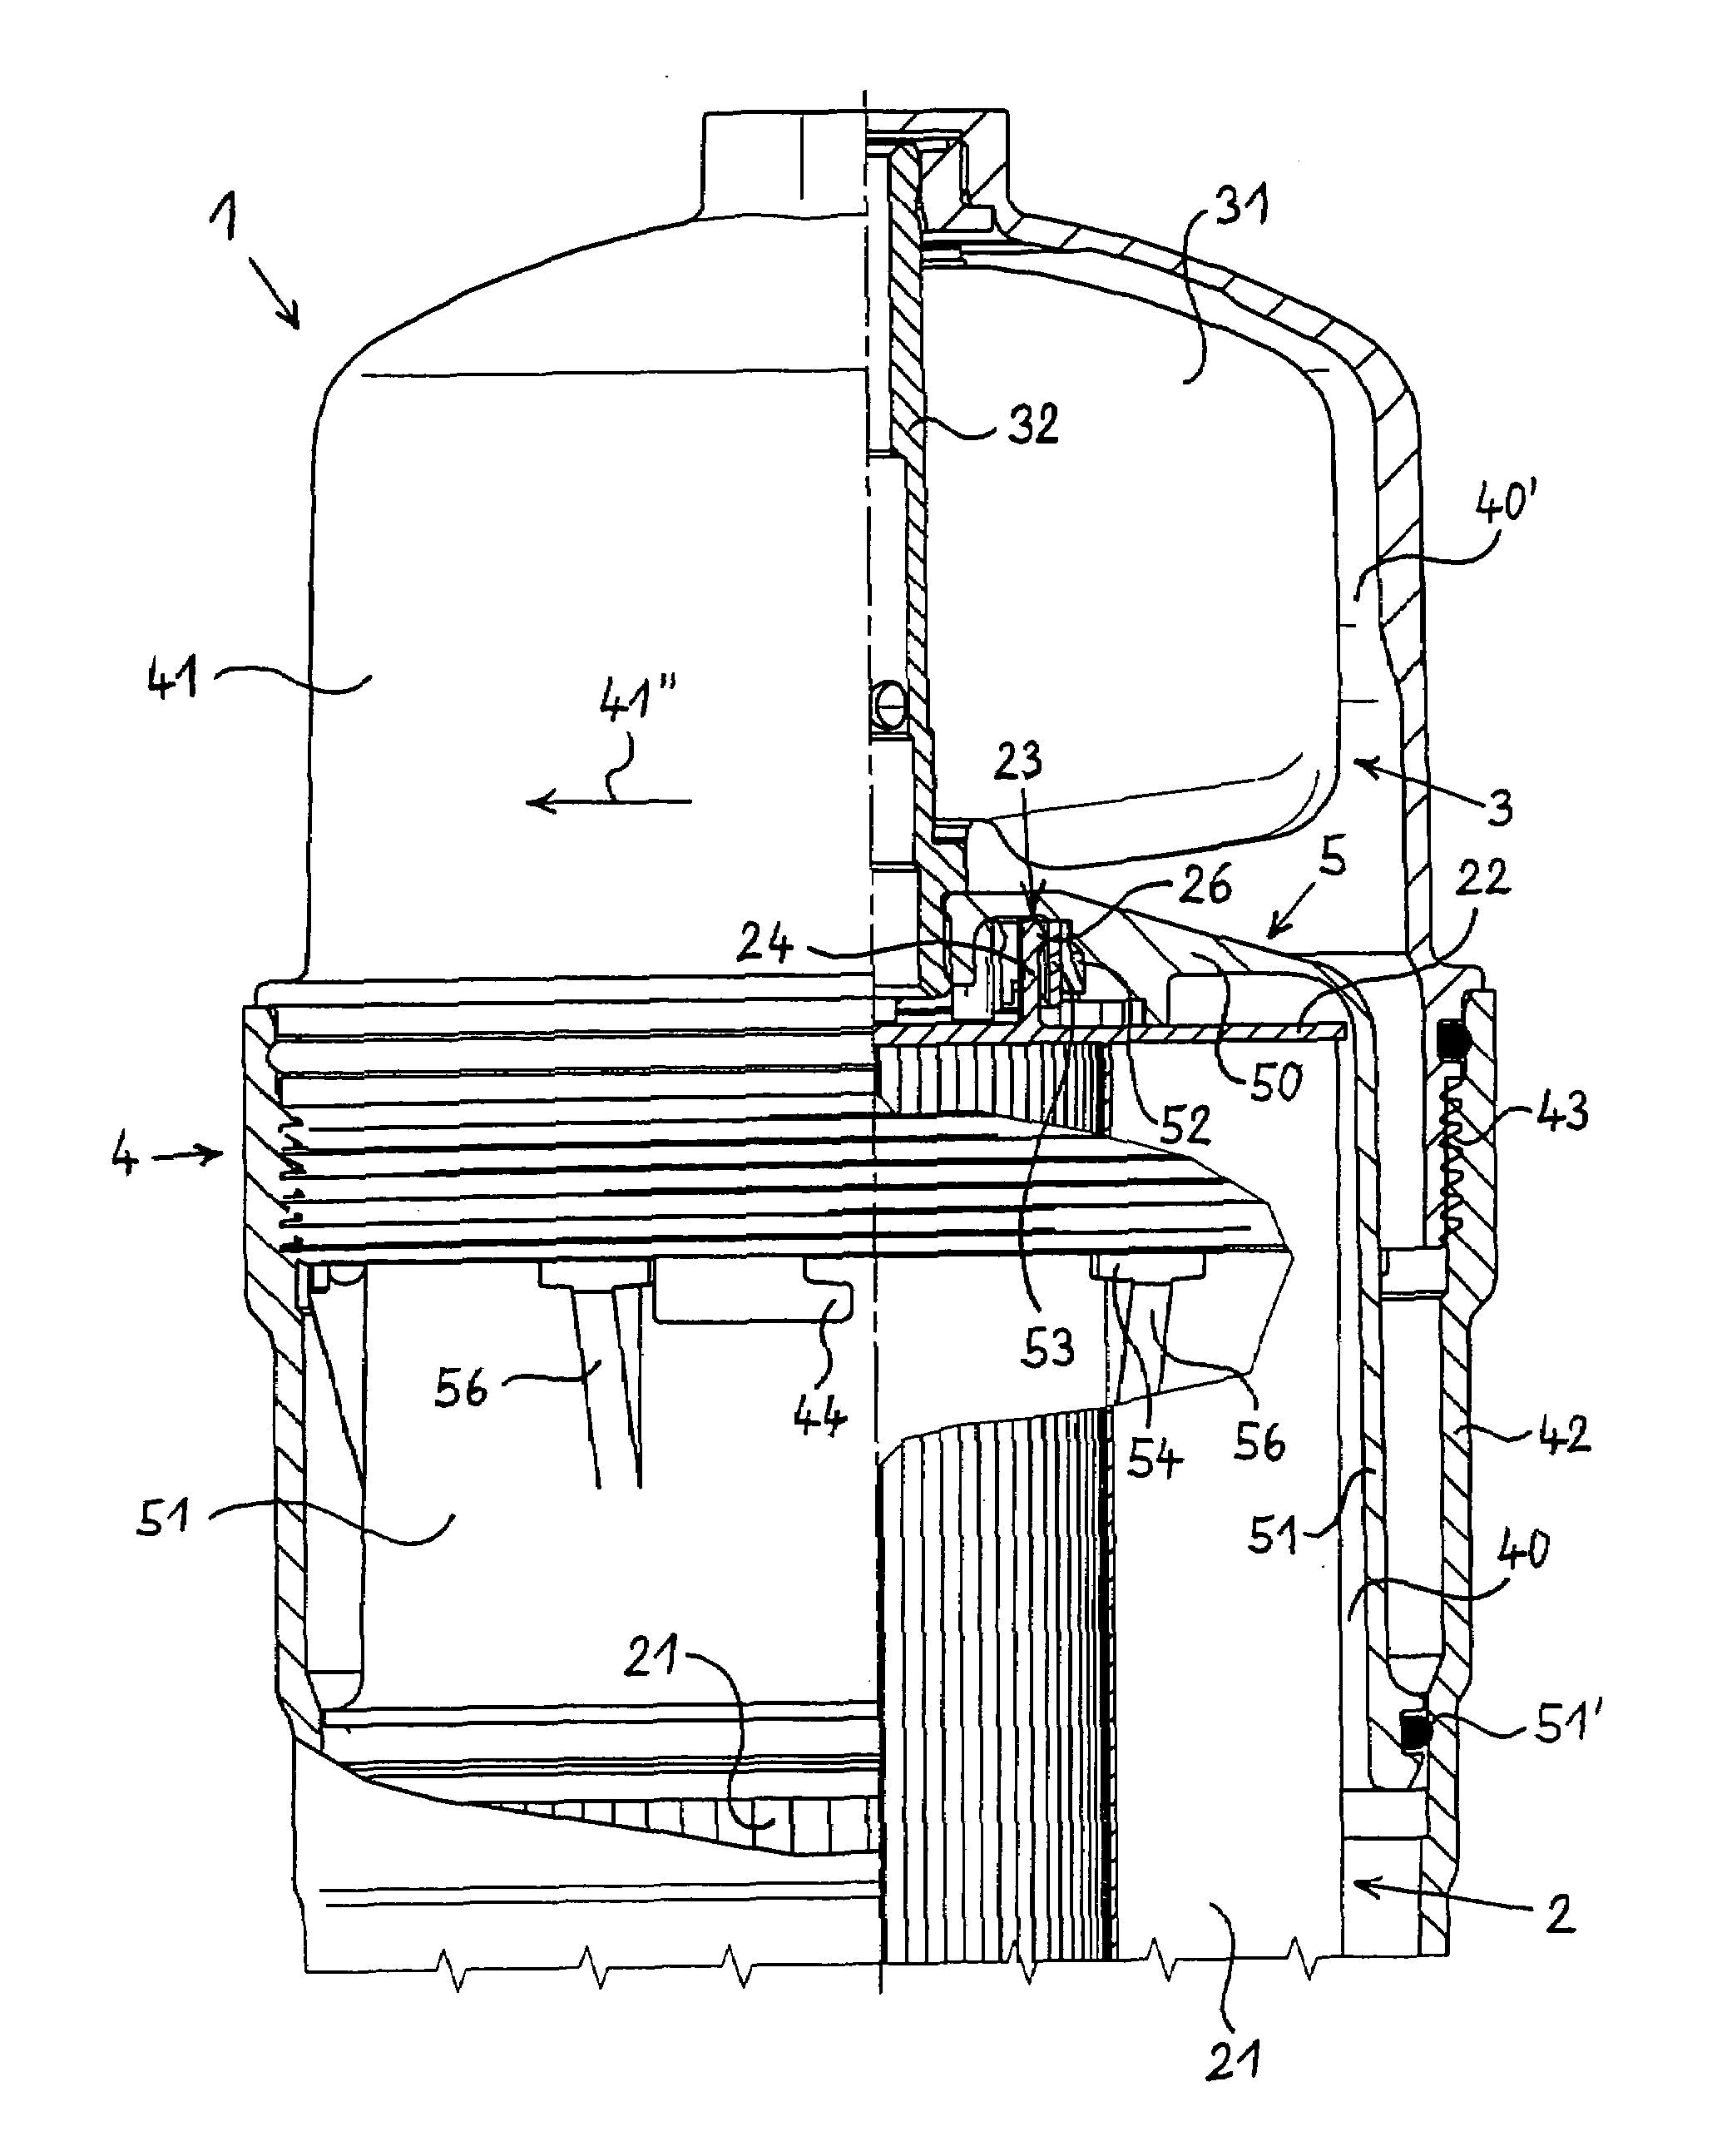 Device for separating impurities from the lubricating oil of an internal combustion engine